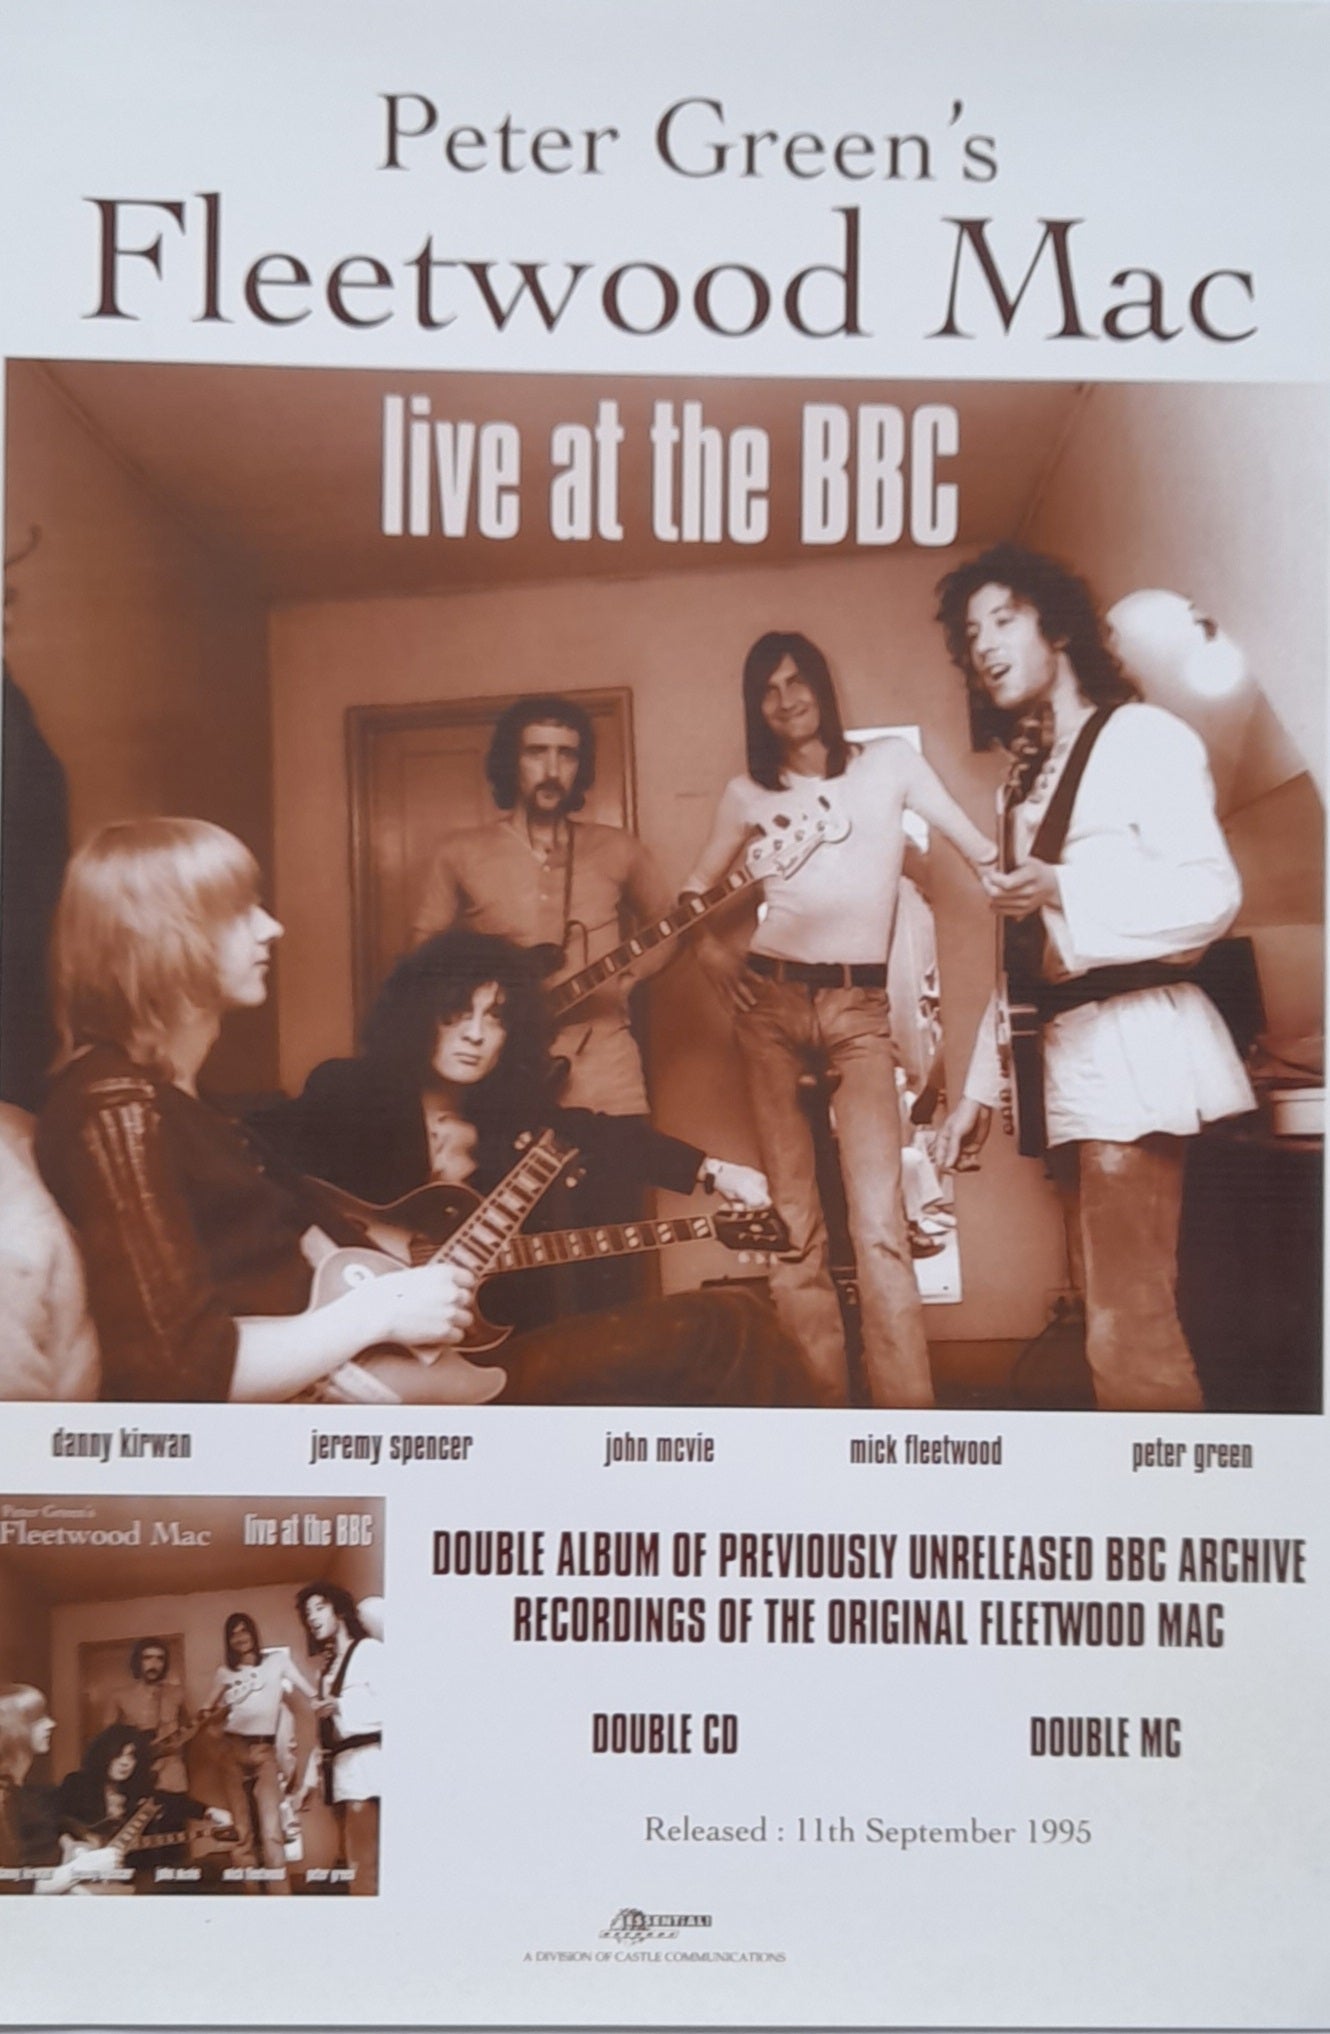 Fleetwood Mac Live at the BBC Promotional Poster